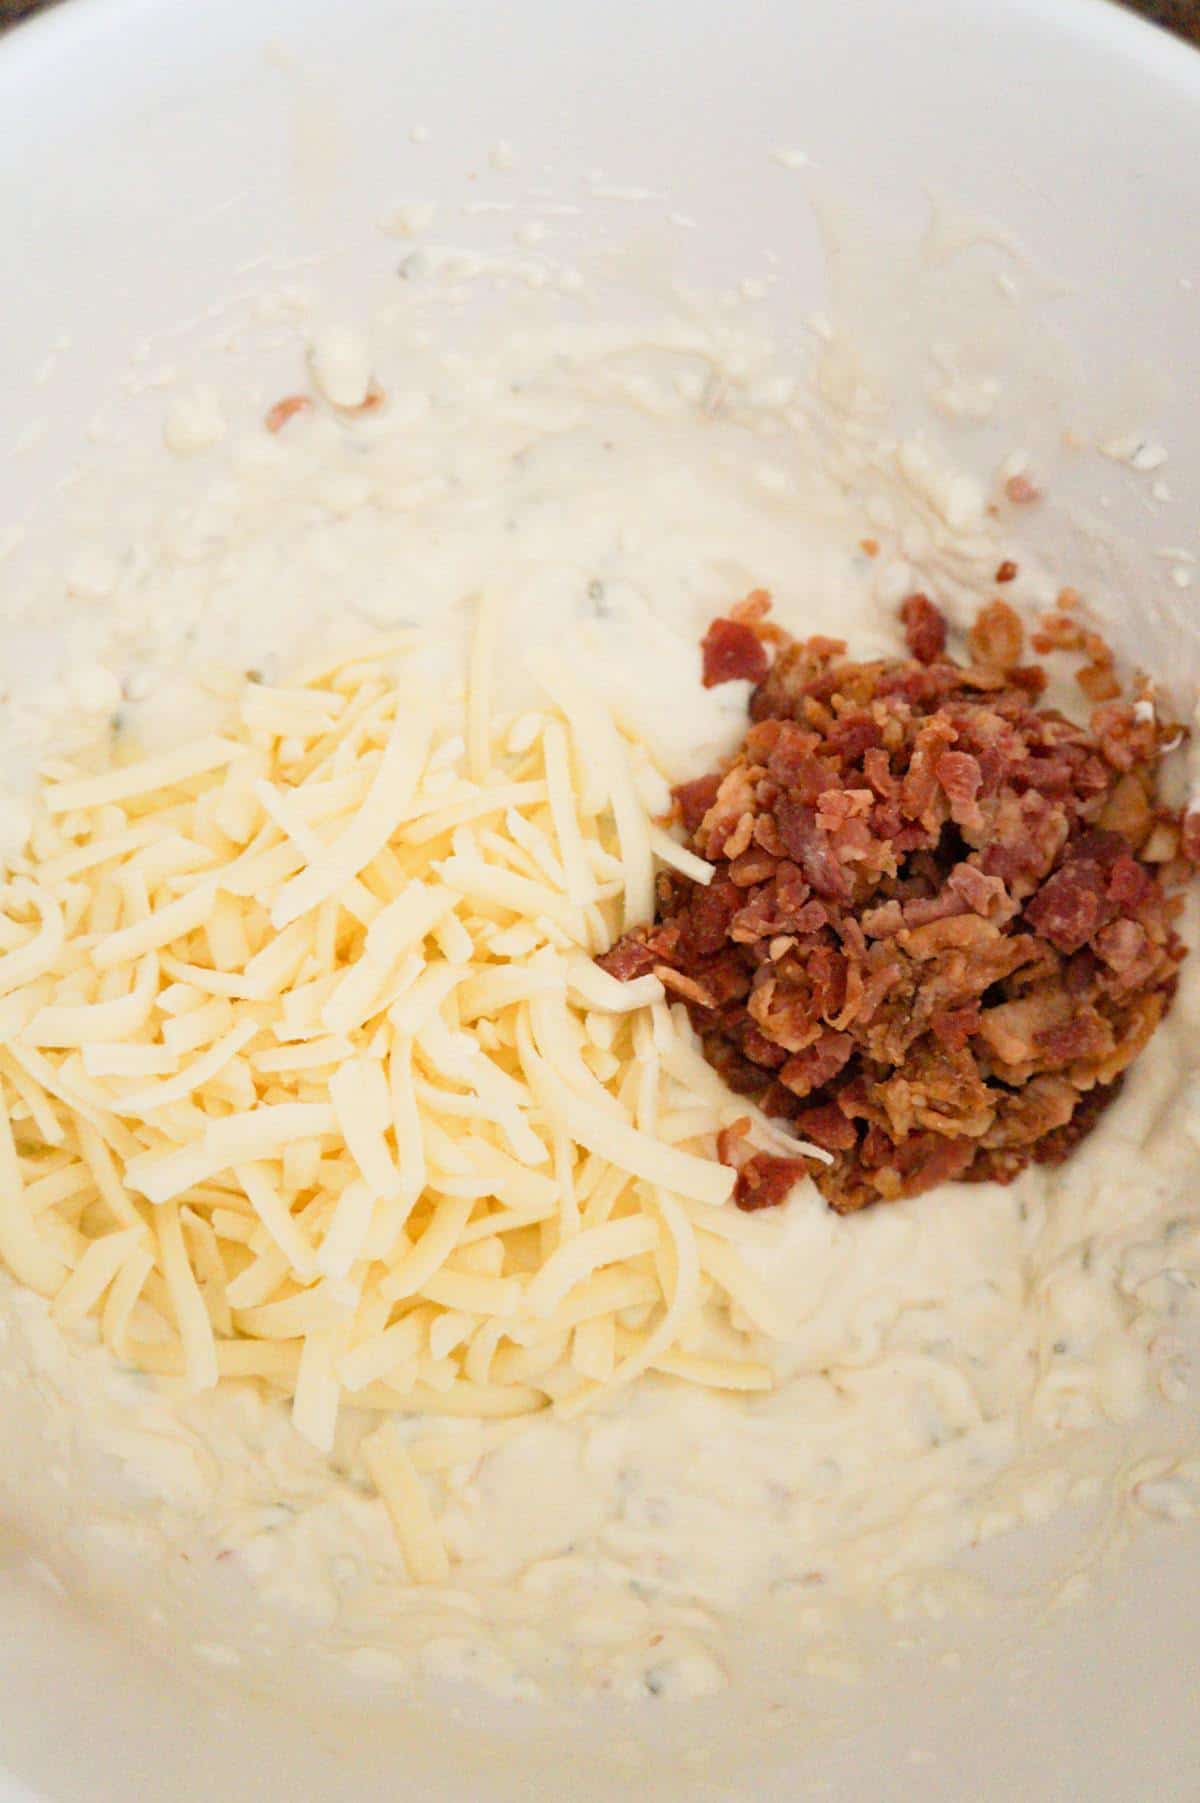 shredded mozzarella and crumbled bacon on top of cream cheese mixture in a mixing bowl